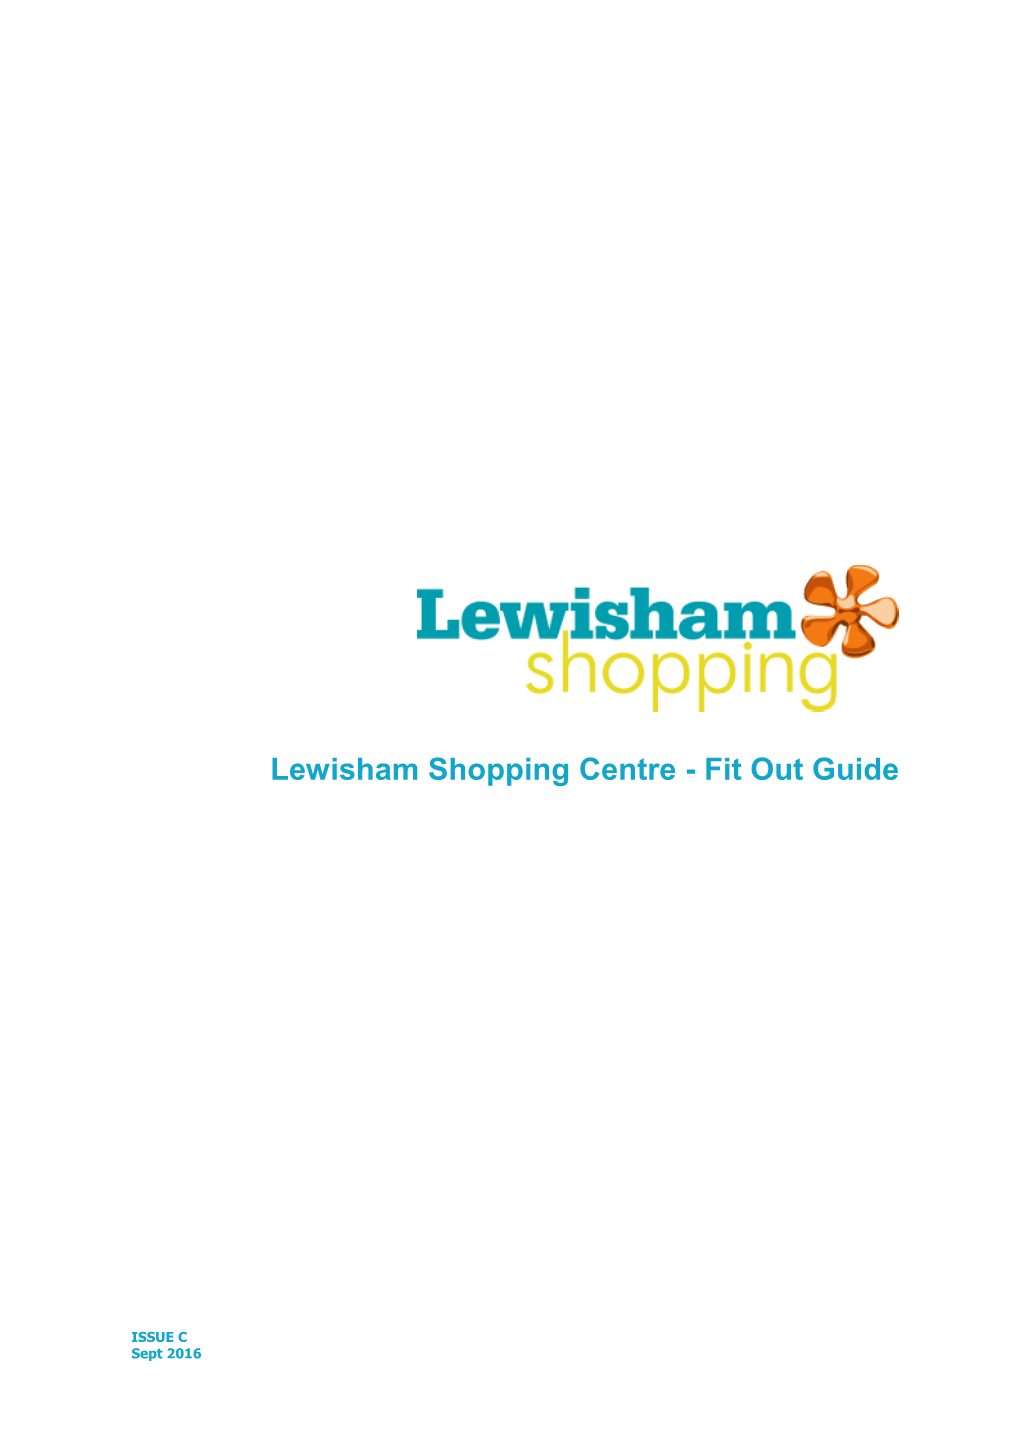 Lewisham Shopping Centre - Fit out Guide